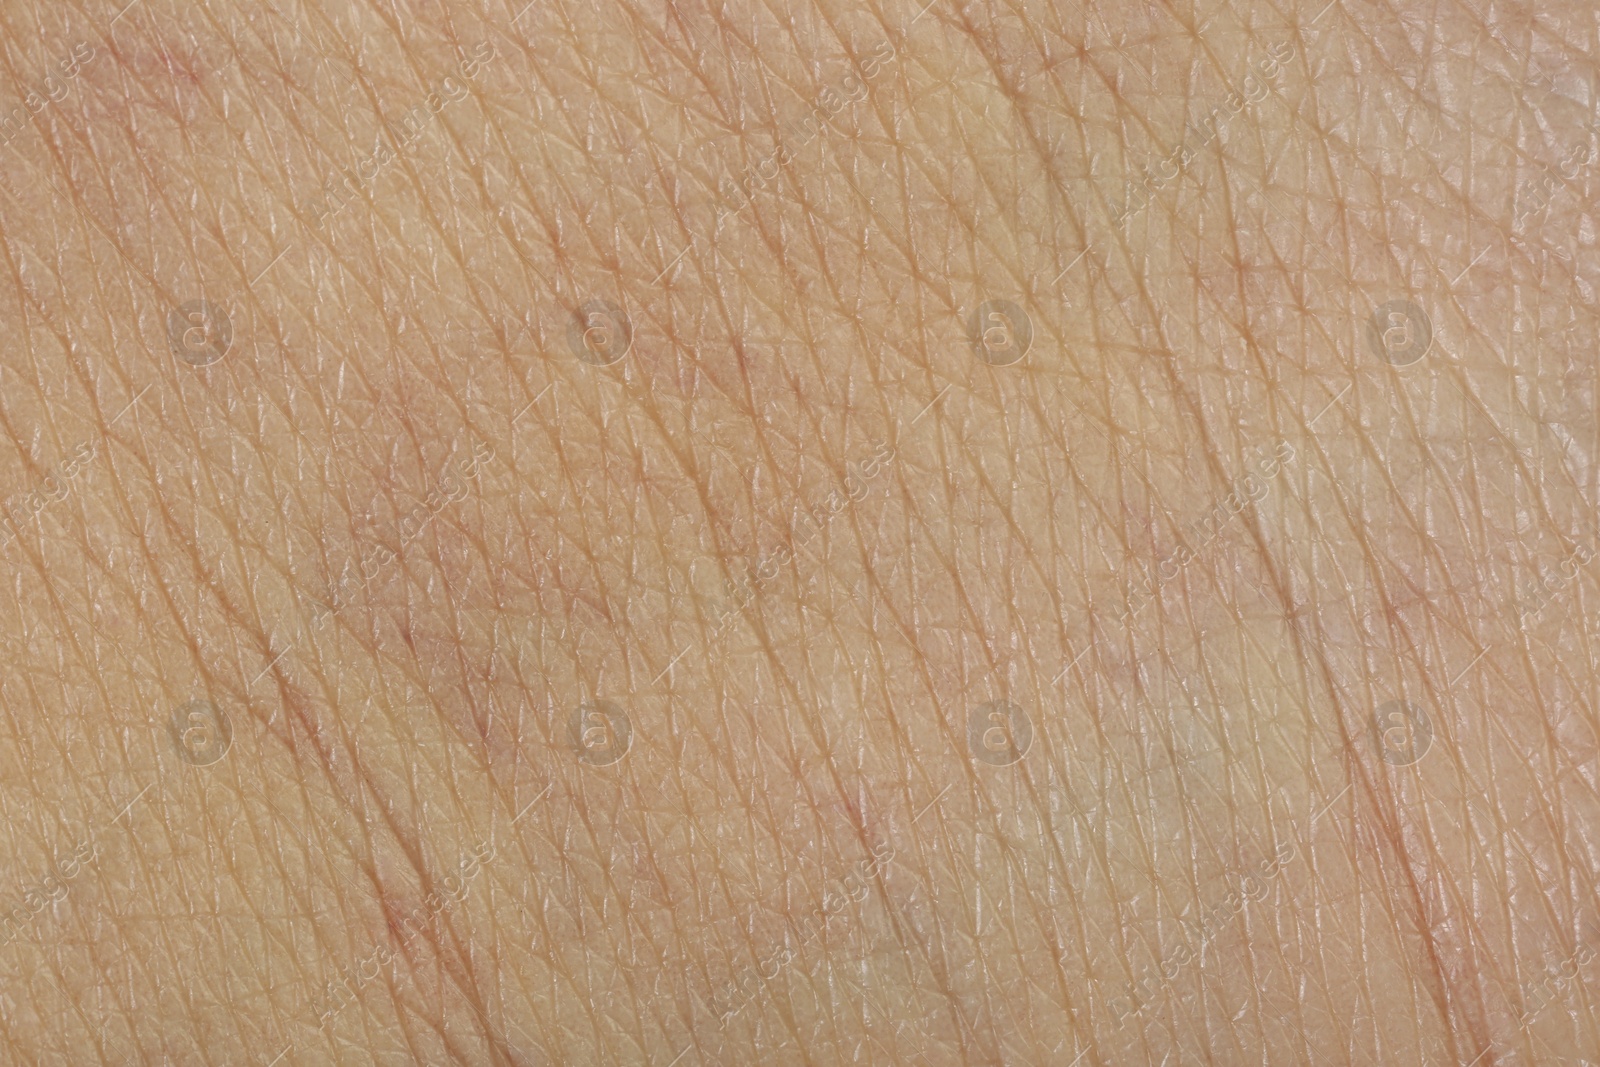 Photo of Texture of healthy skin as background, macro view